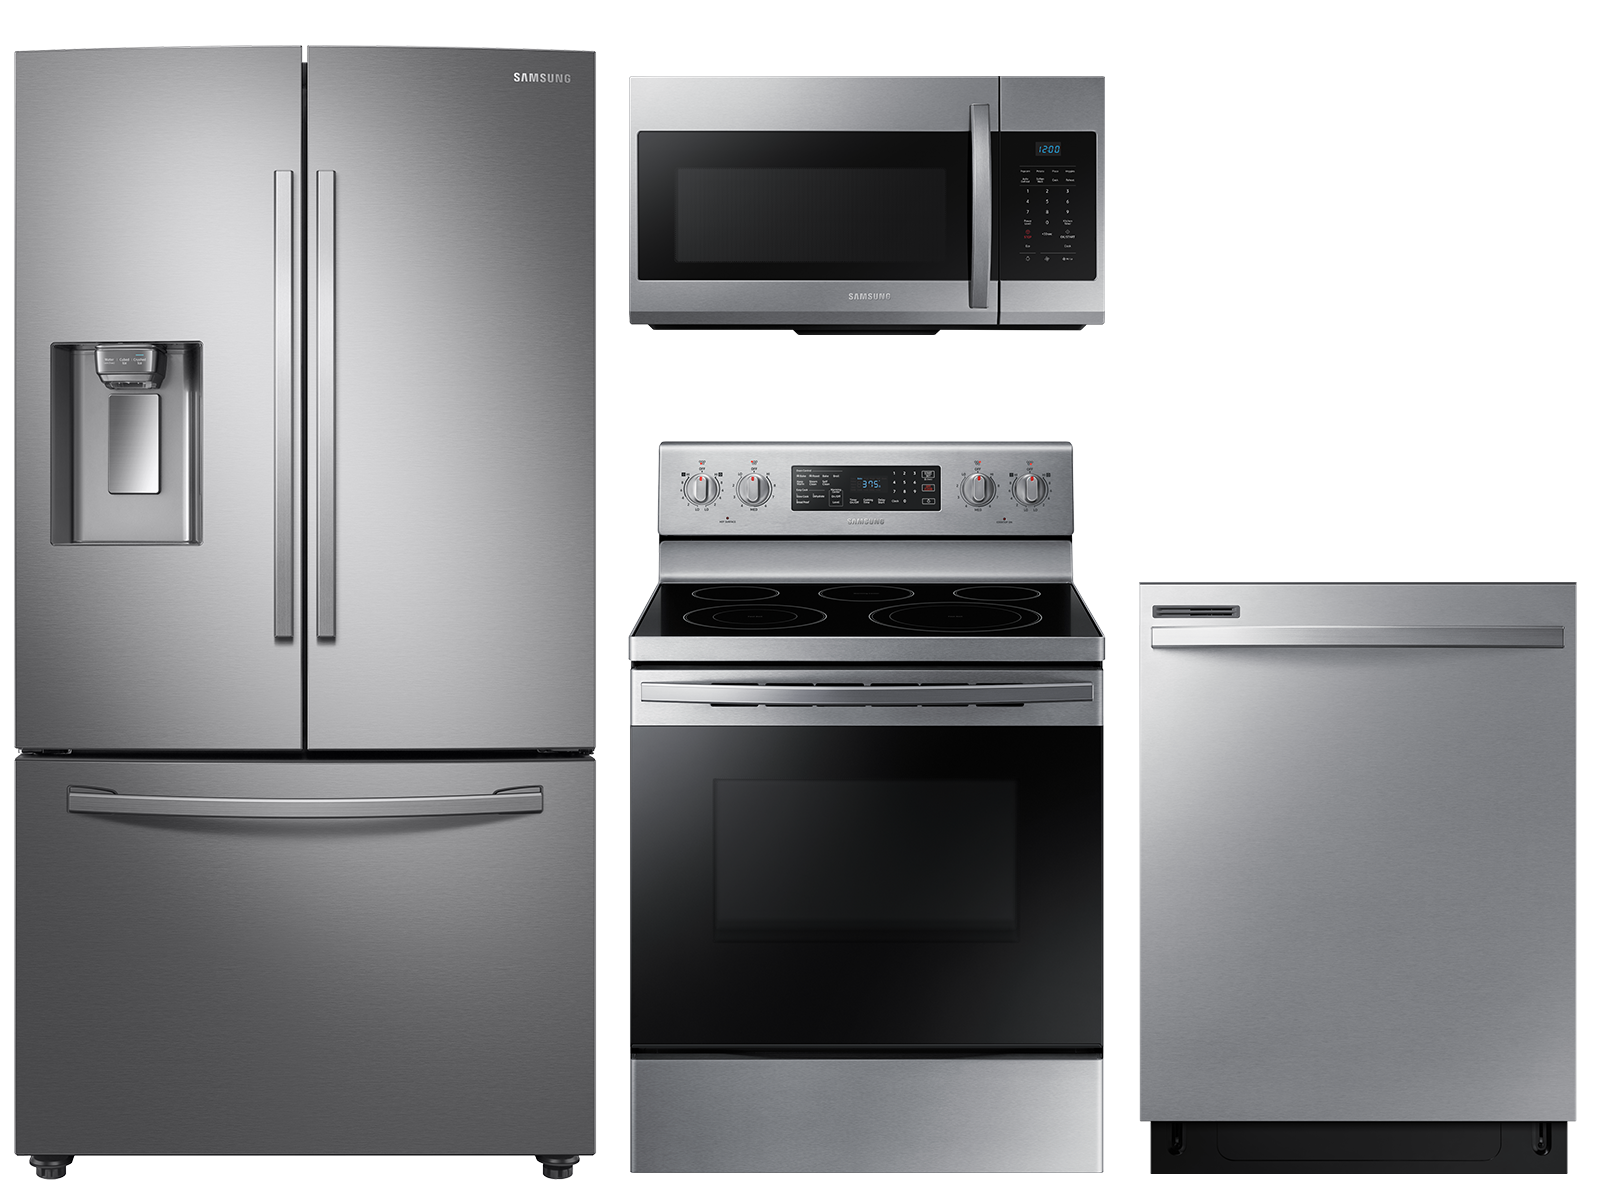 Samsung Large Capacity 3-door Refrigerator + Electric Range with Convection + 55 dBA Dishwasher + Microwave in Stainless Steel(BNDL-1646291345588)